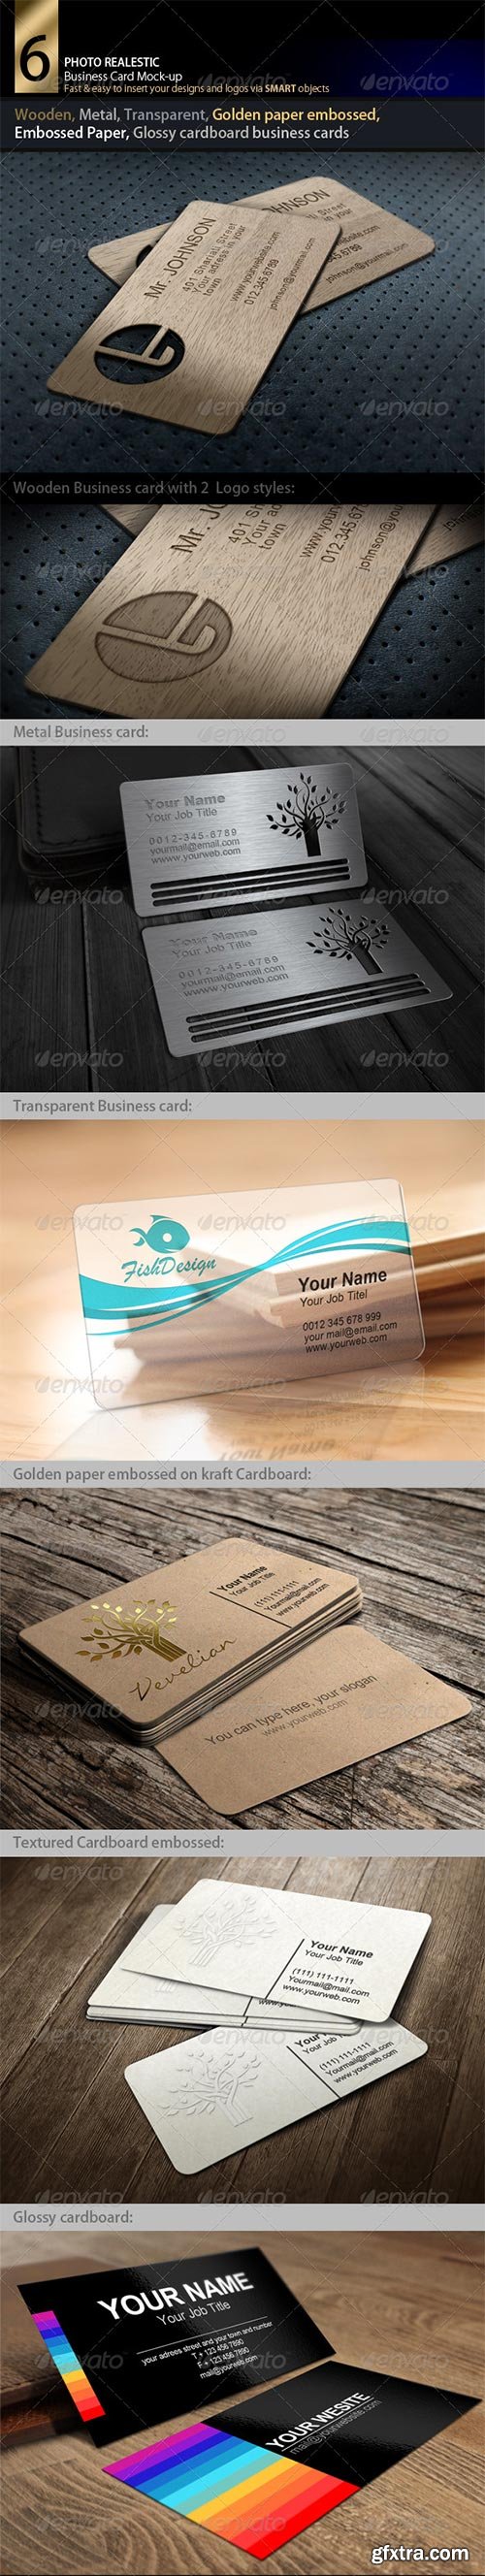 GraphicRiver - Photo Realistic Business card Mock-up